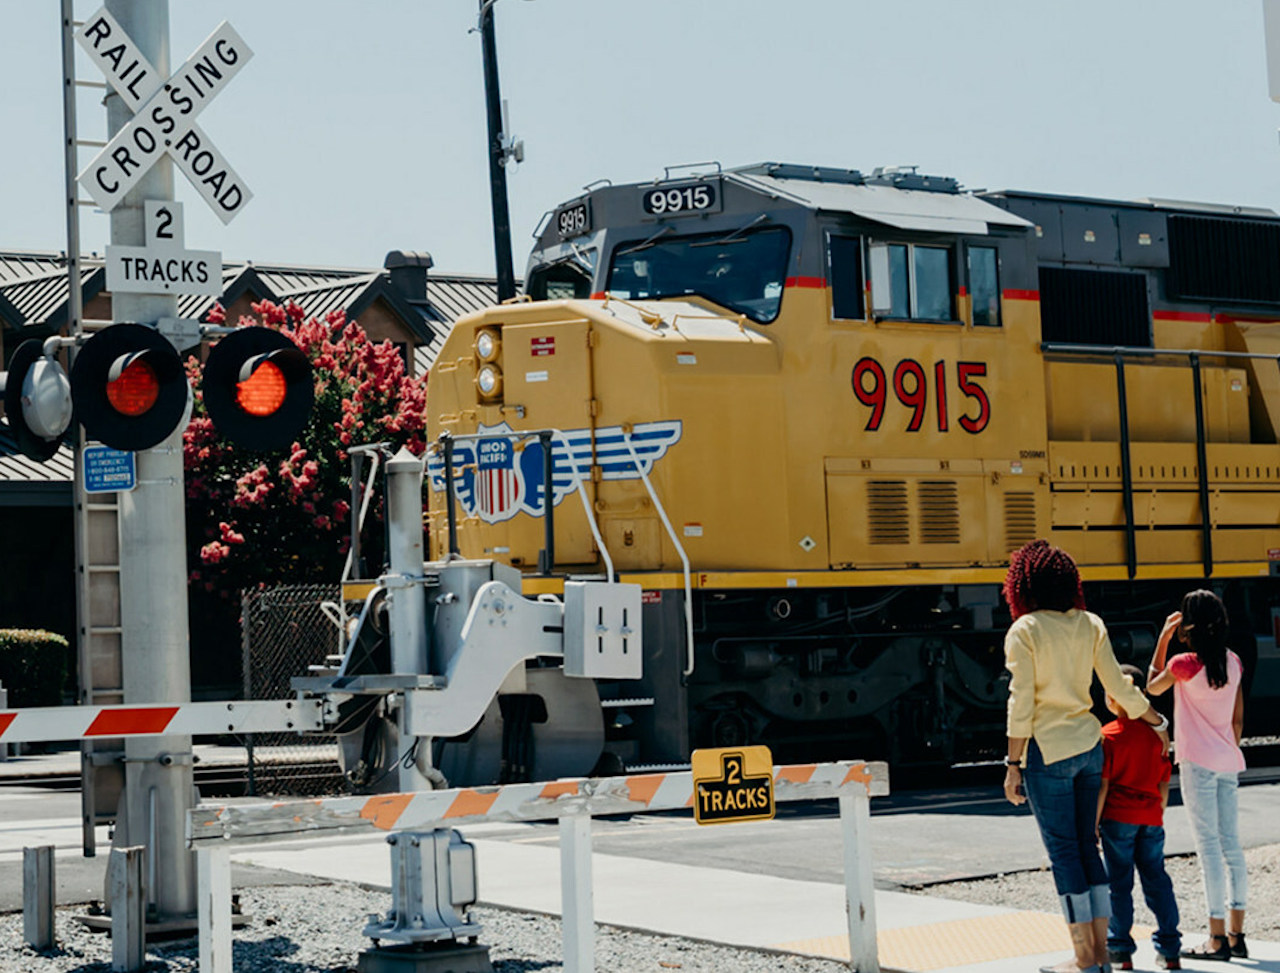 Only cross train tracks at a designated crossing. Designated crossings are marked by a sign, lights, or a gate. (Safe Kids Worldwide photo)